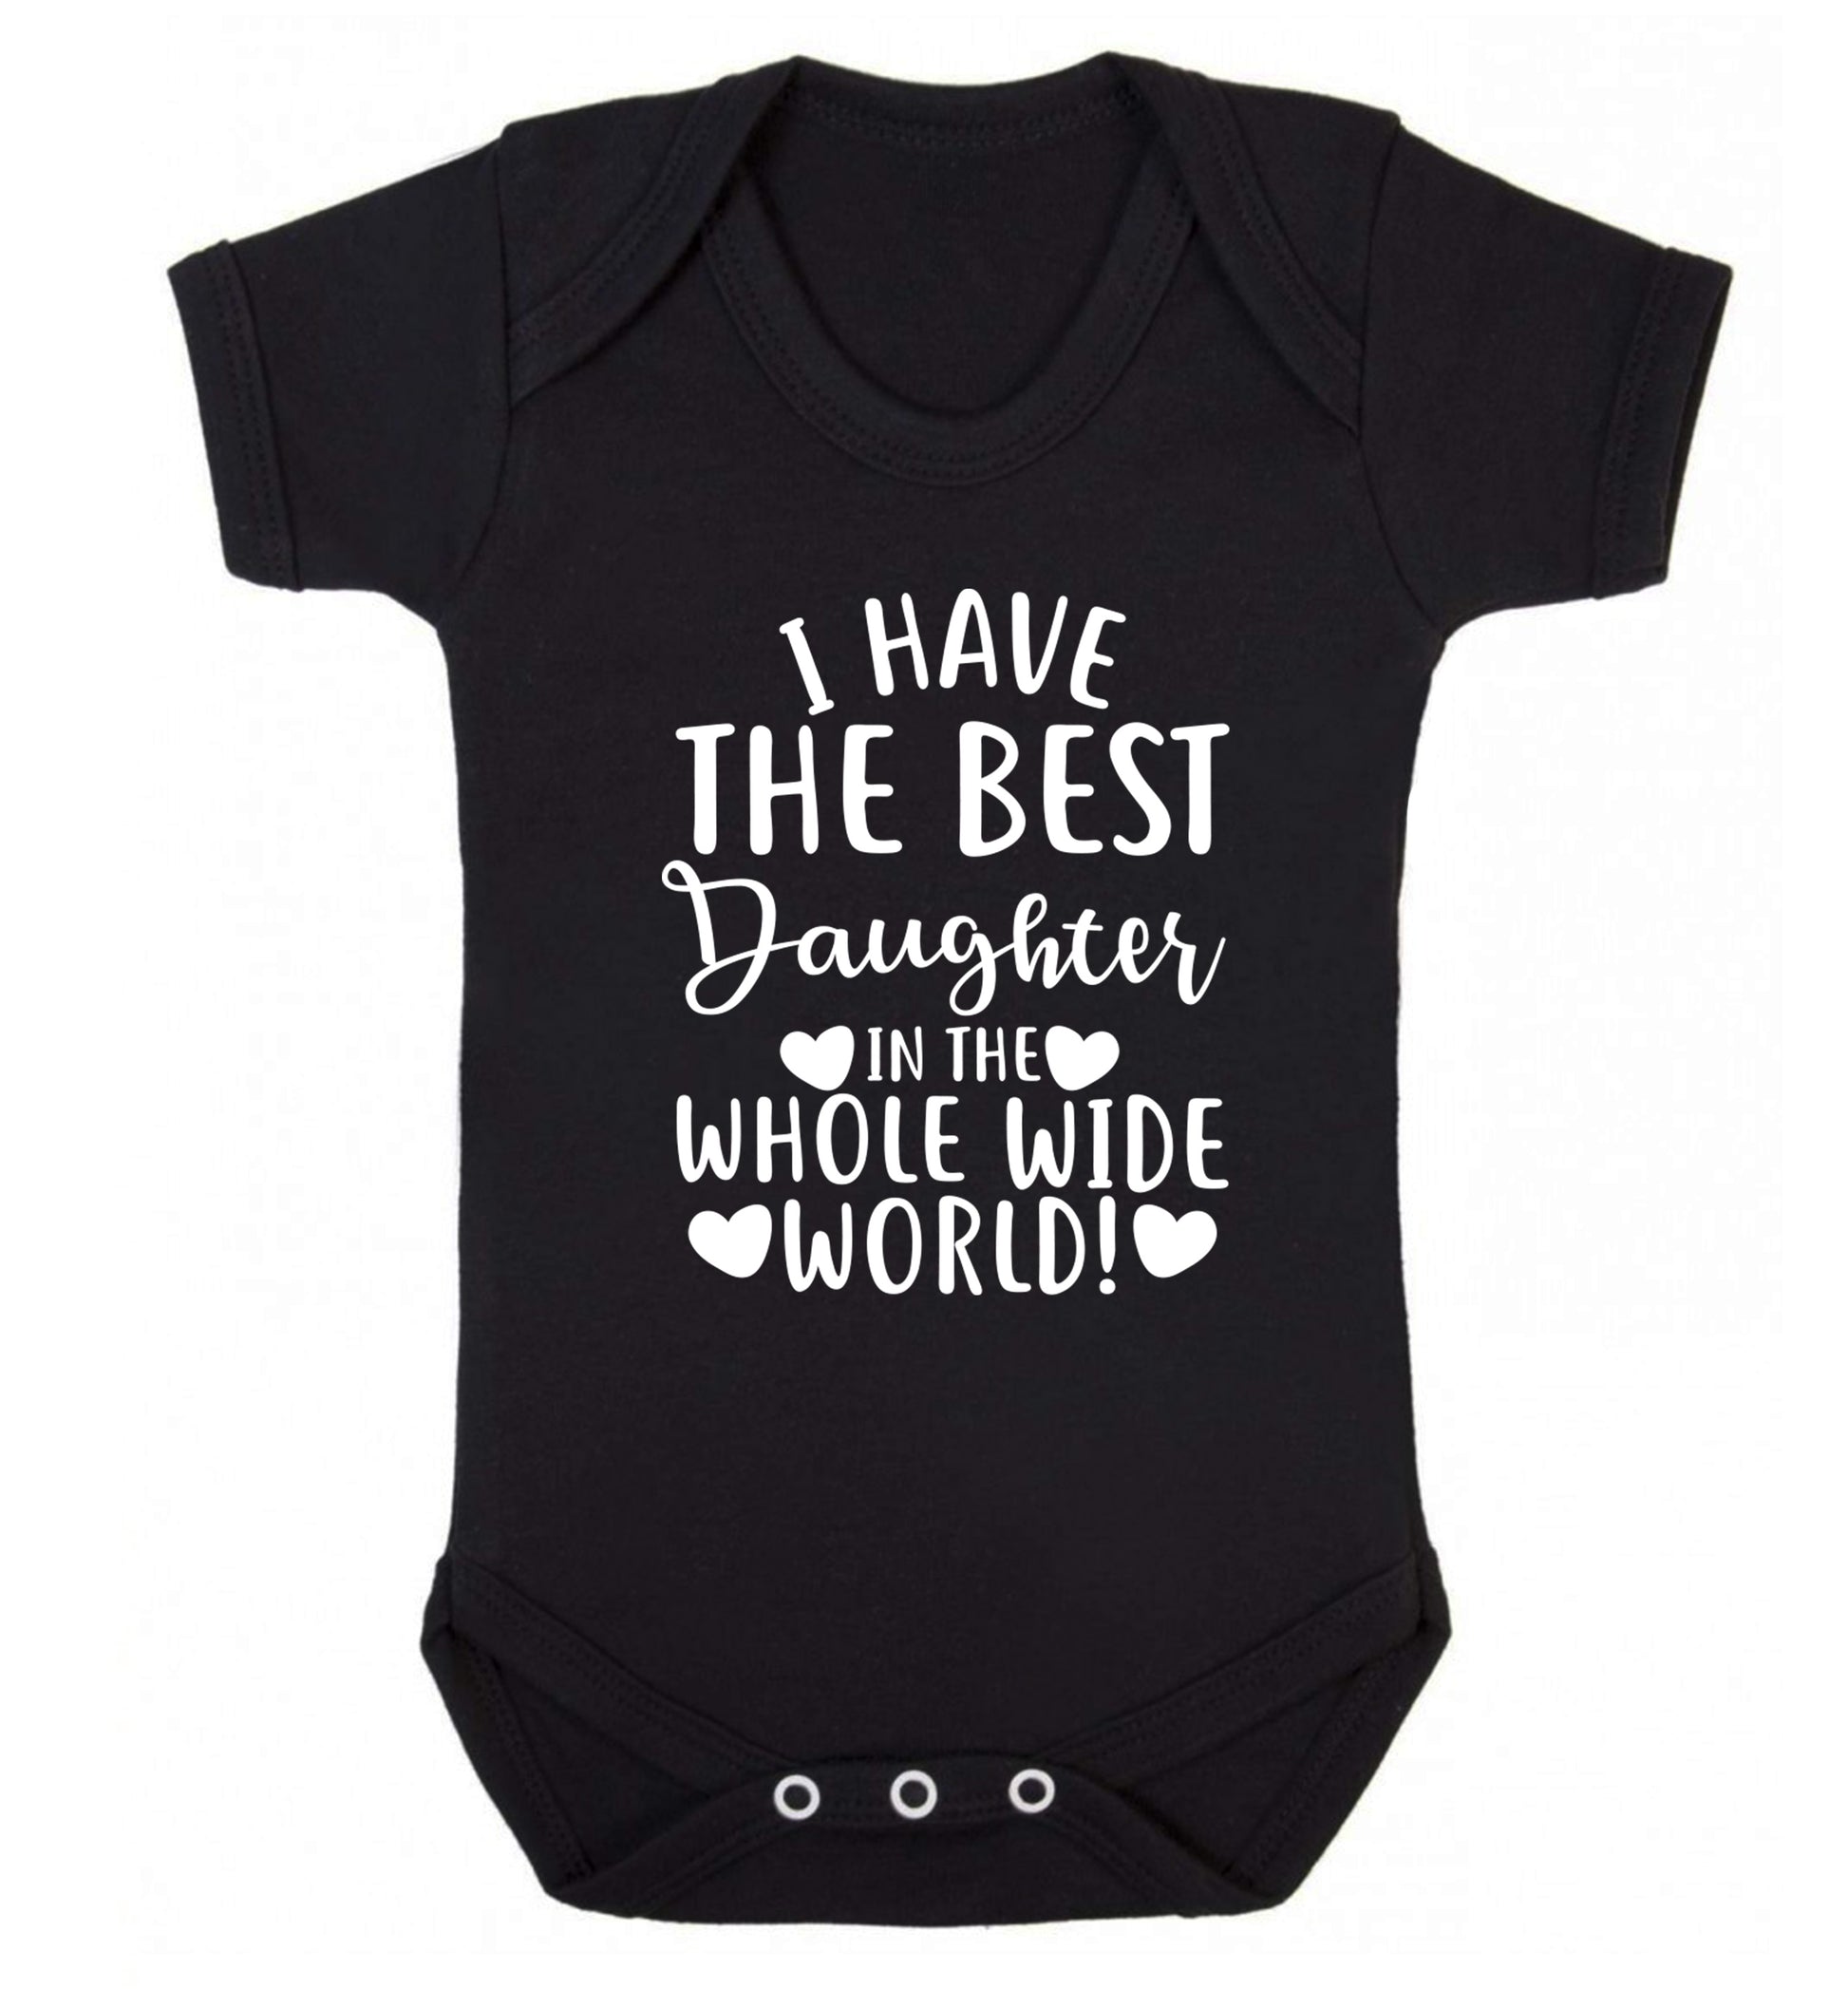 I have the best daughter in the whole wide world! Baby Vest black 18-24 months